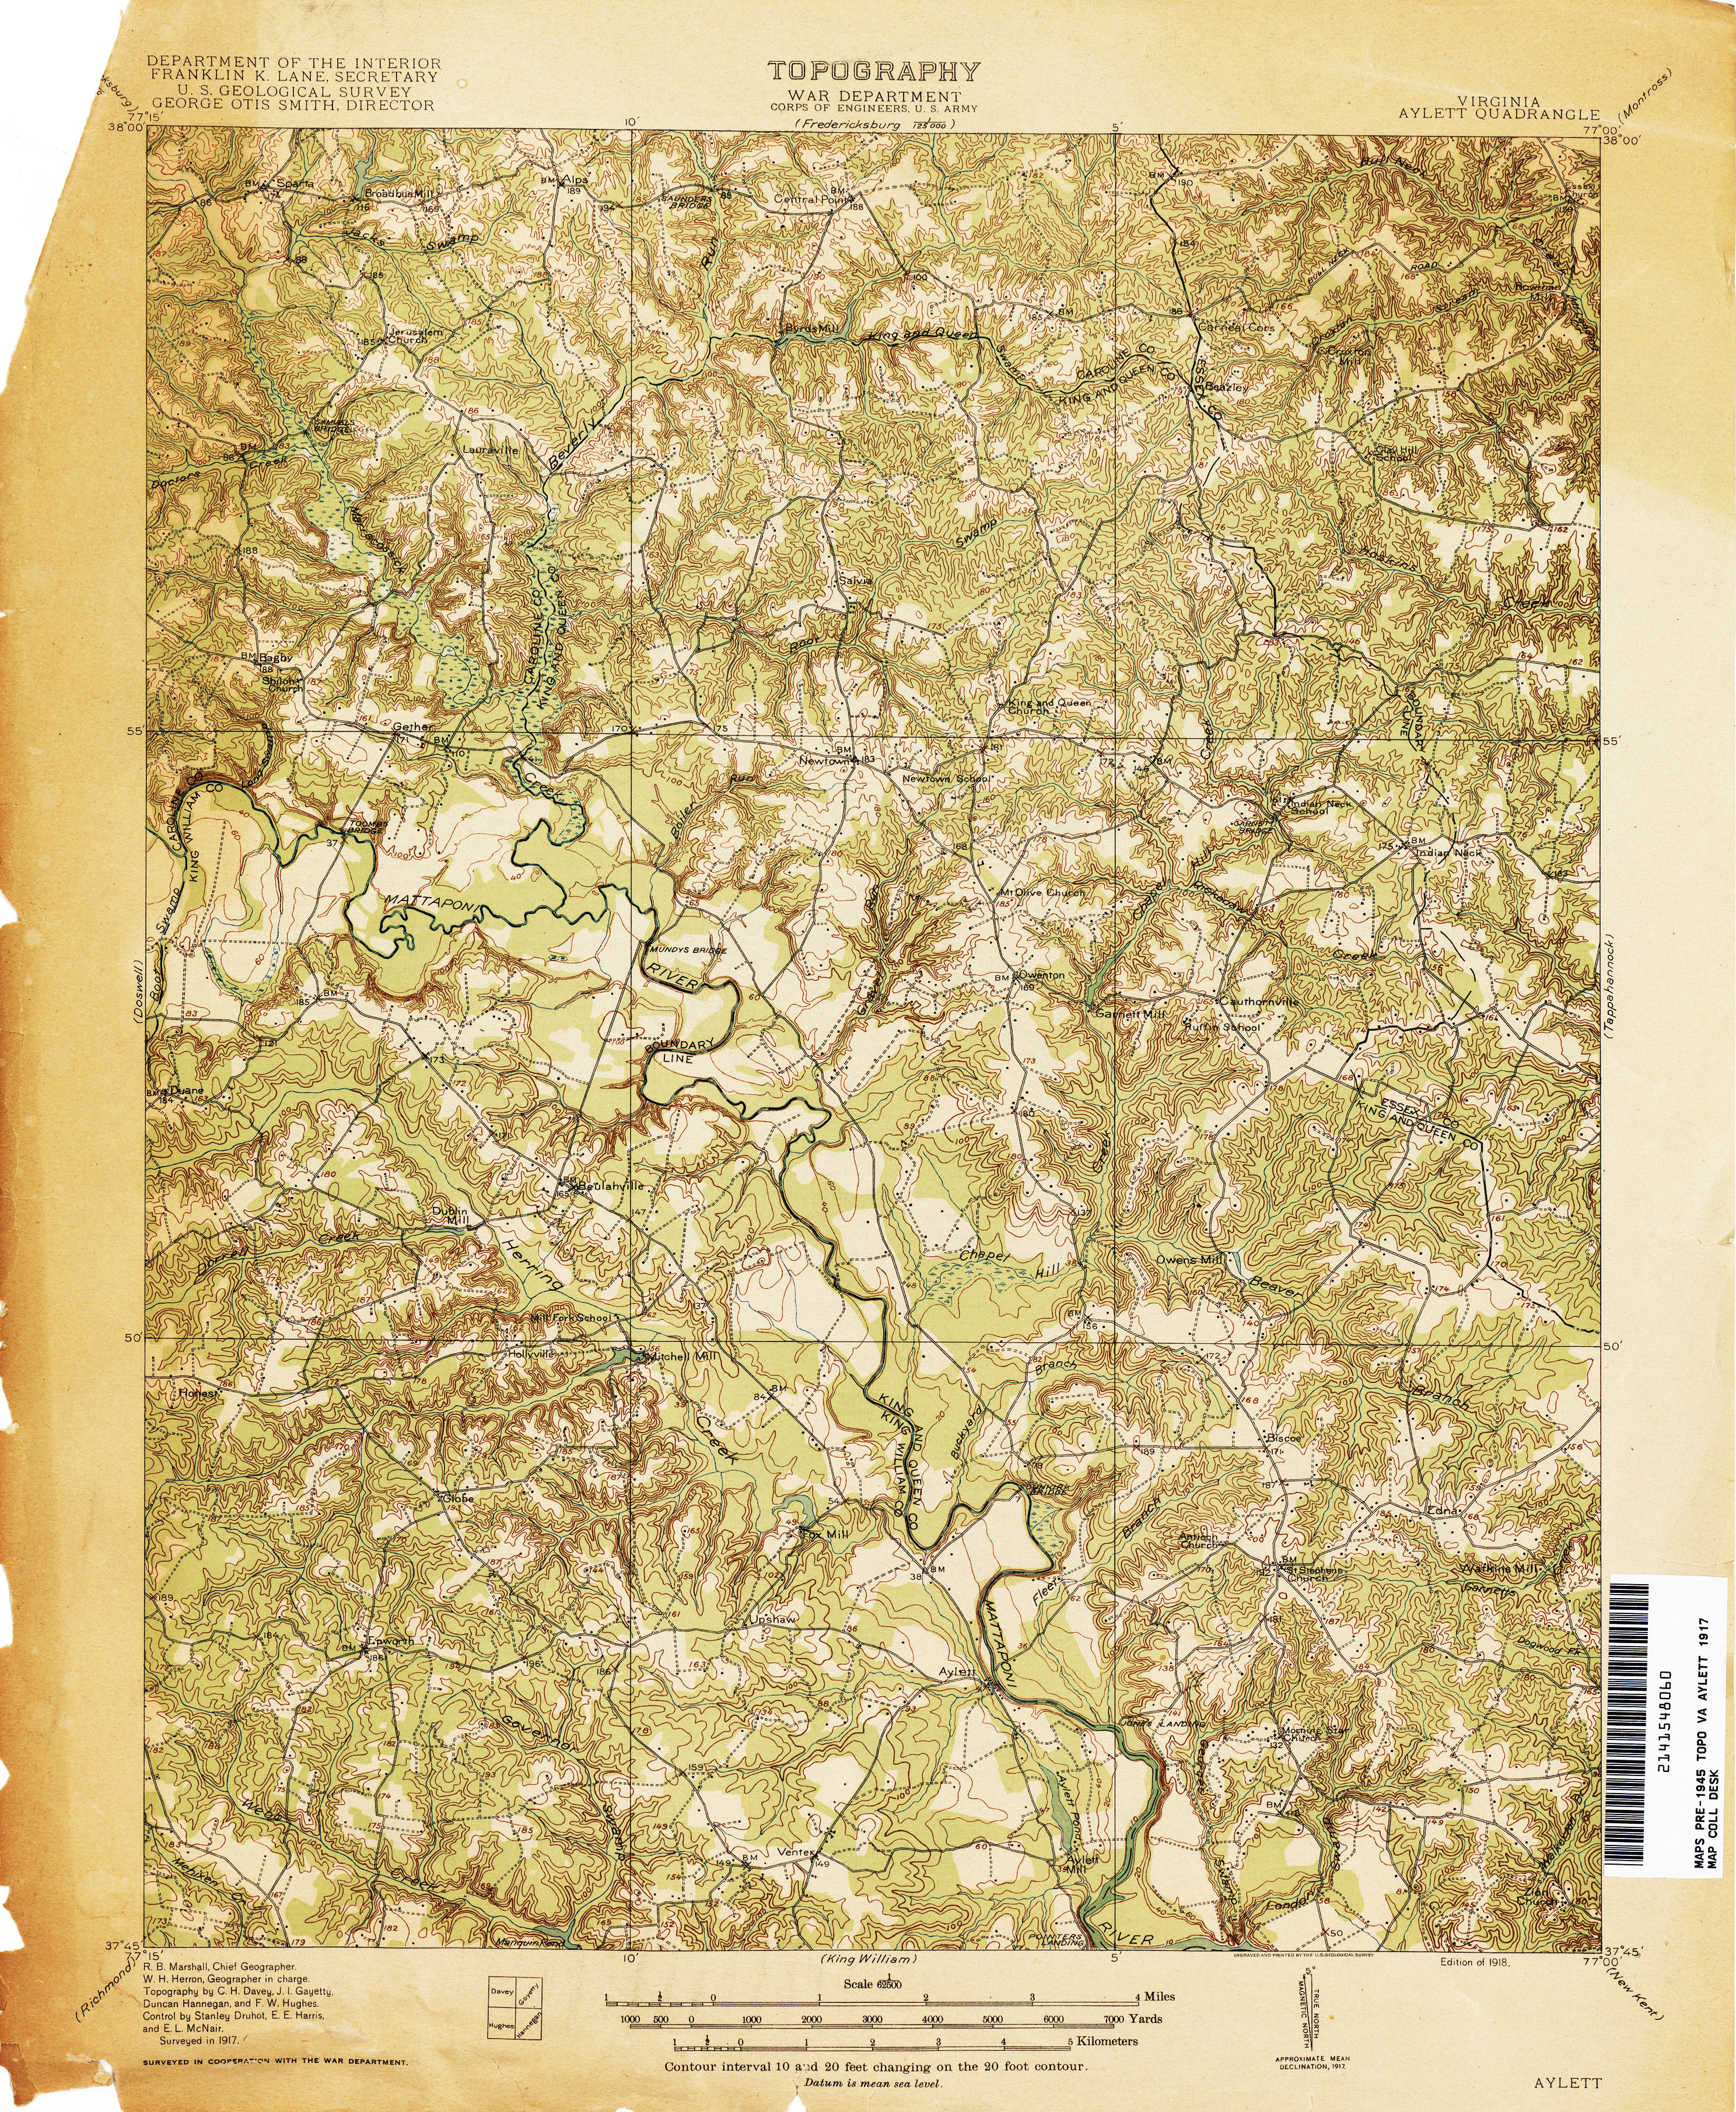 Virginia North Carolina 1994-100K Details about   USGS Topographic Map SOUTH BOSTON 